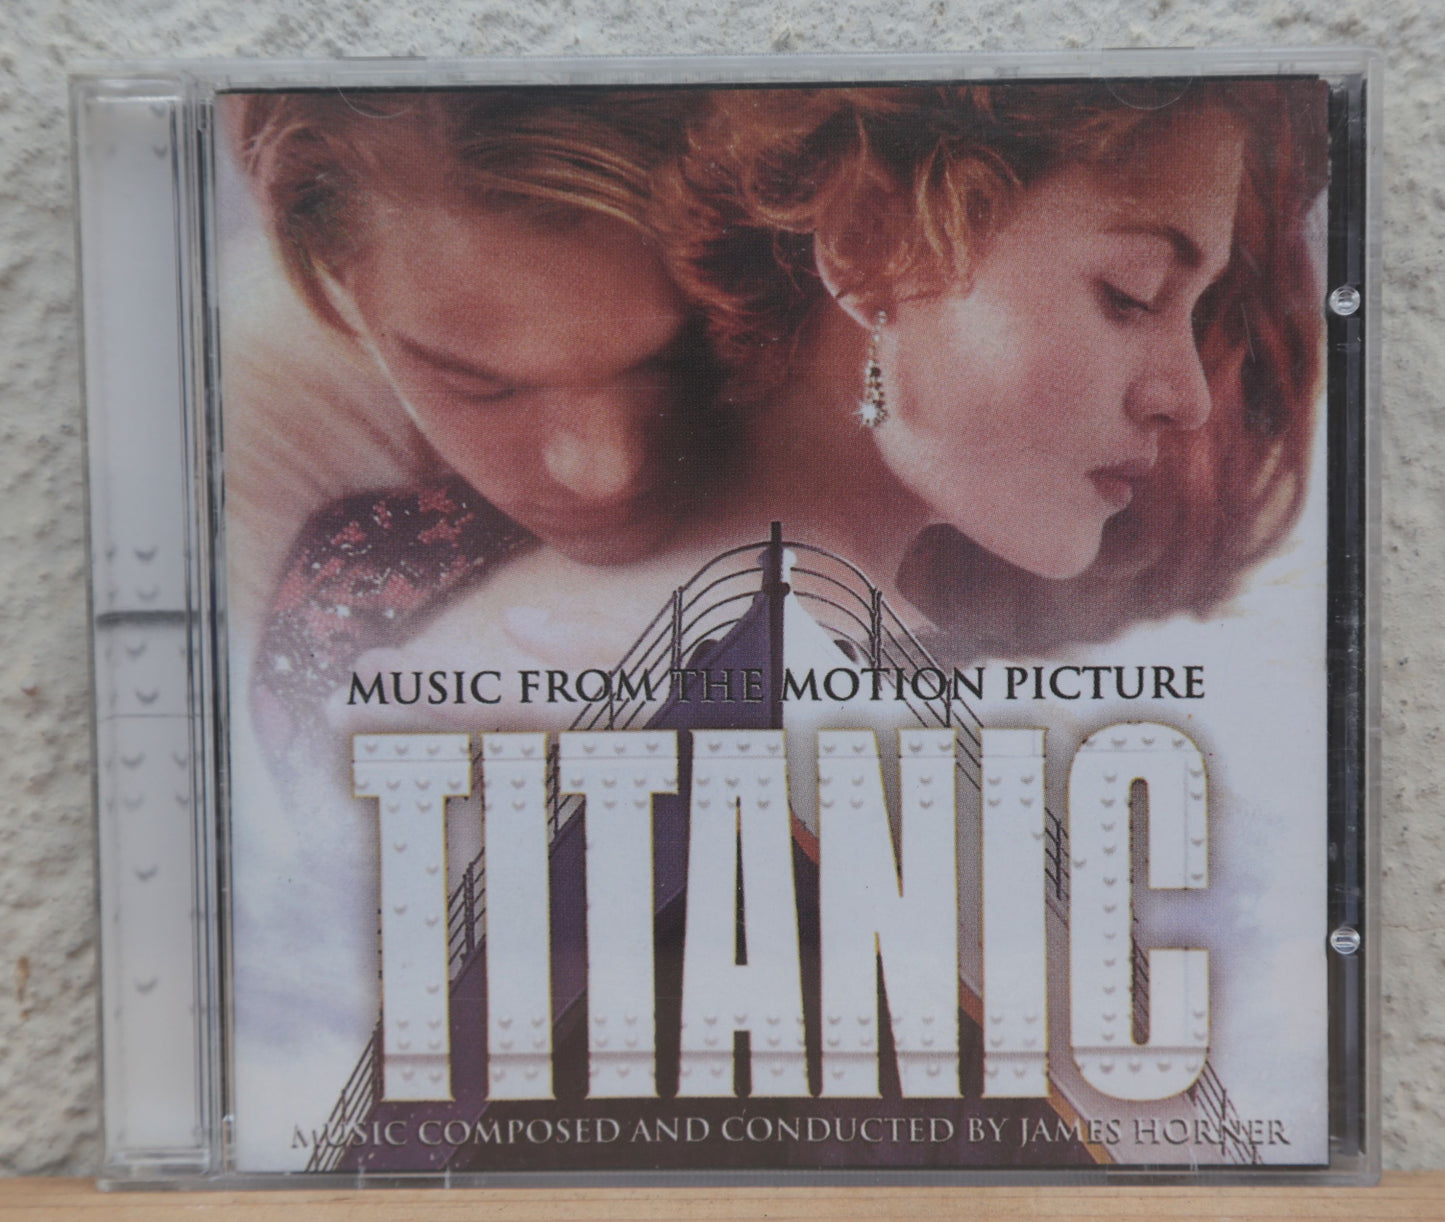 Titanic - Music from the motion picture (cd)